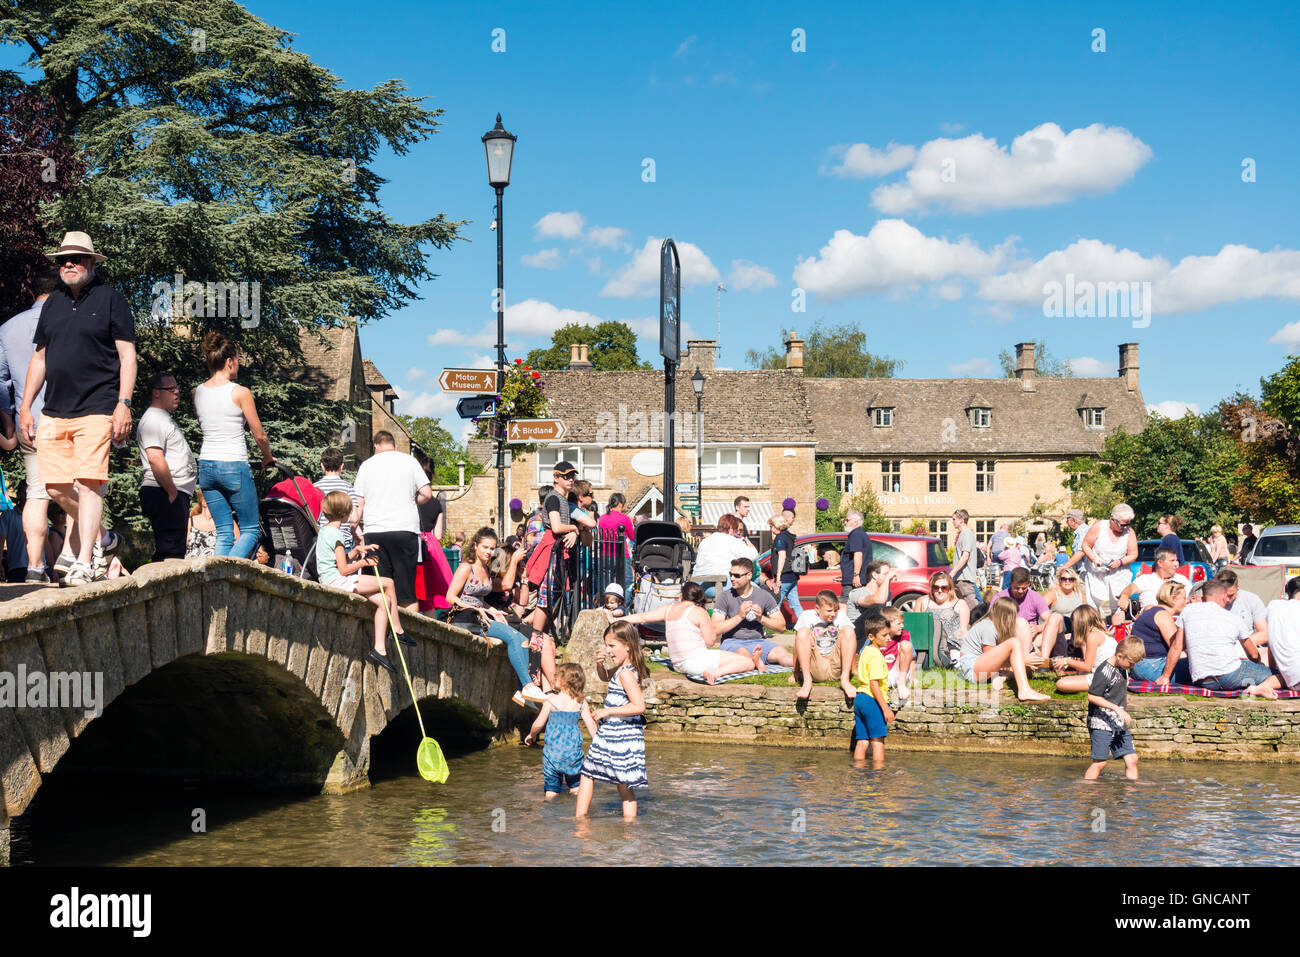 August Bank Holiday Familientag am Bourton-on-the-Water, Cotswolds, UK. Stockfoto